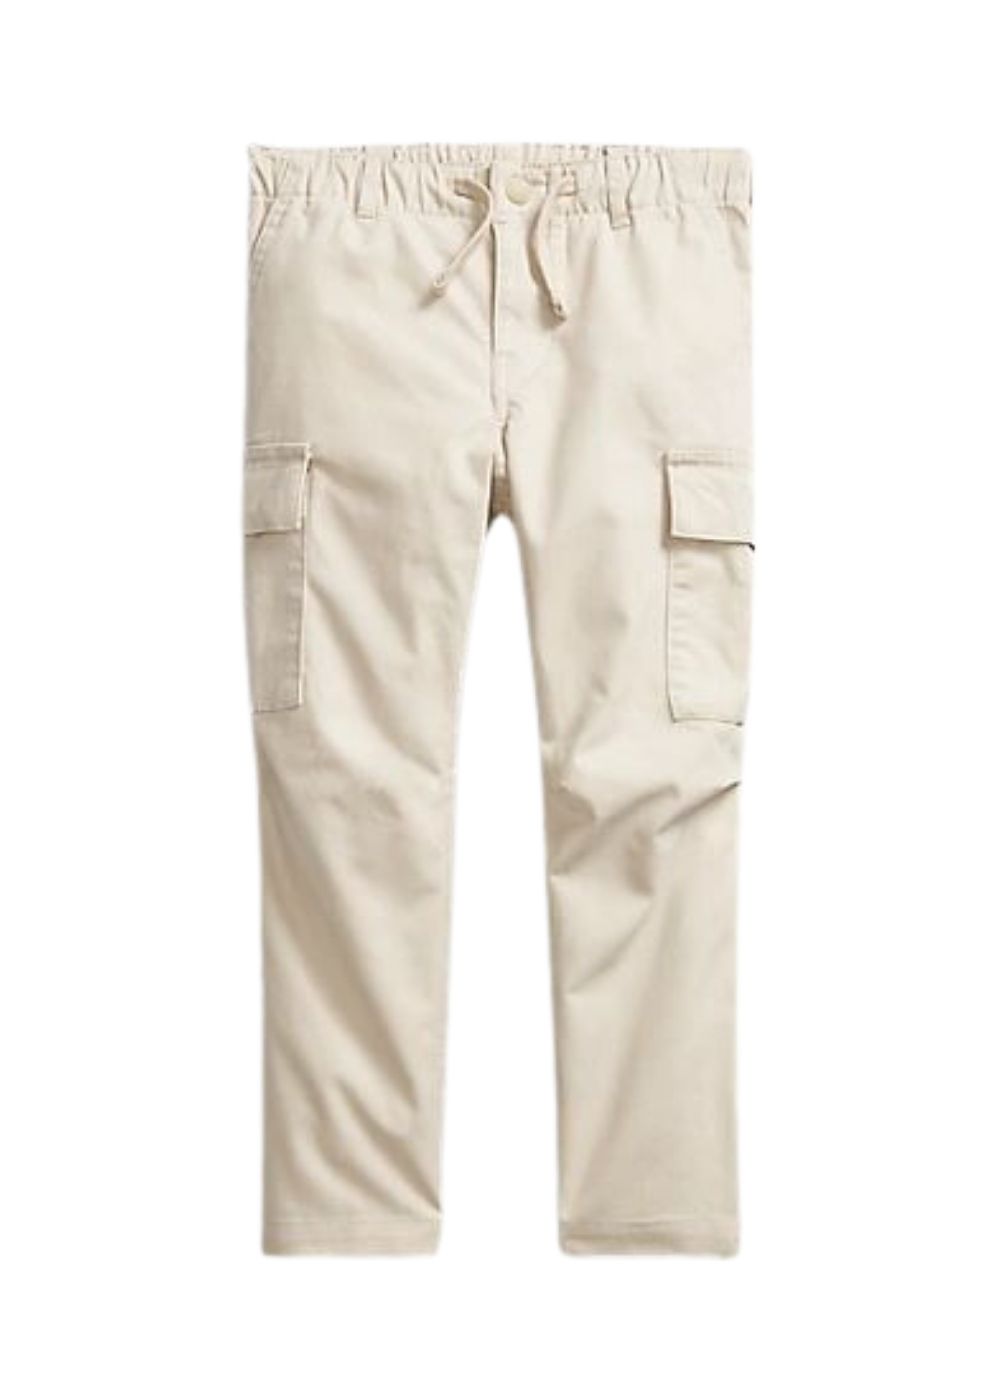 Featured image for “Polo Ralph Lauren Pantaloni In Chino Stretch”